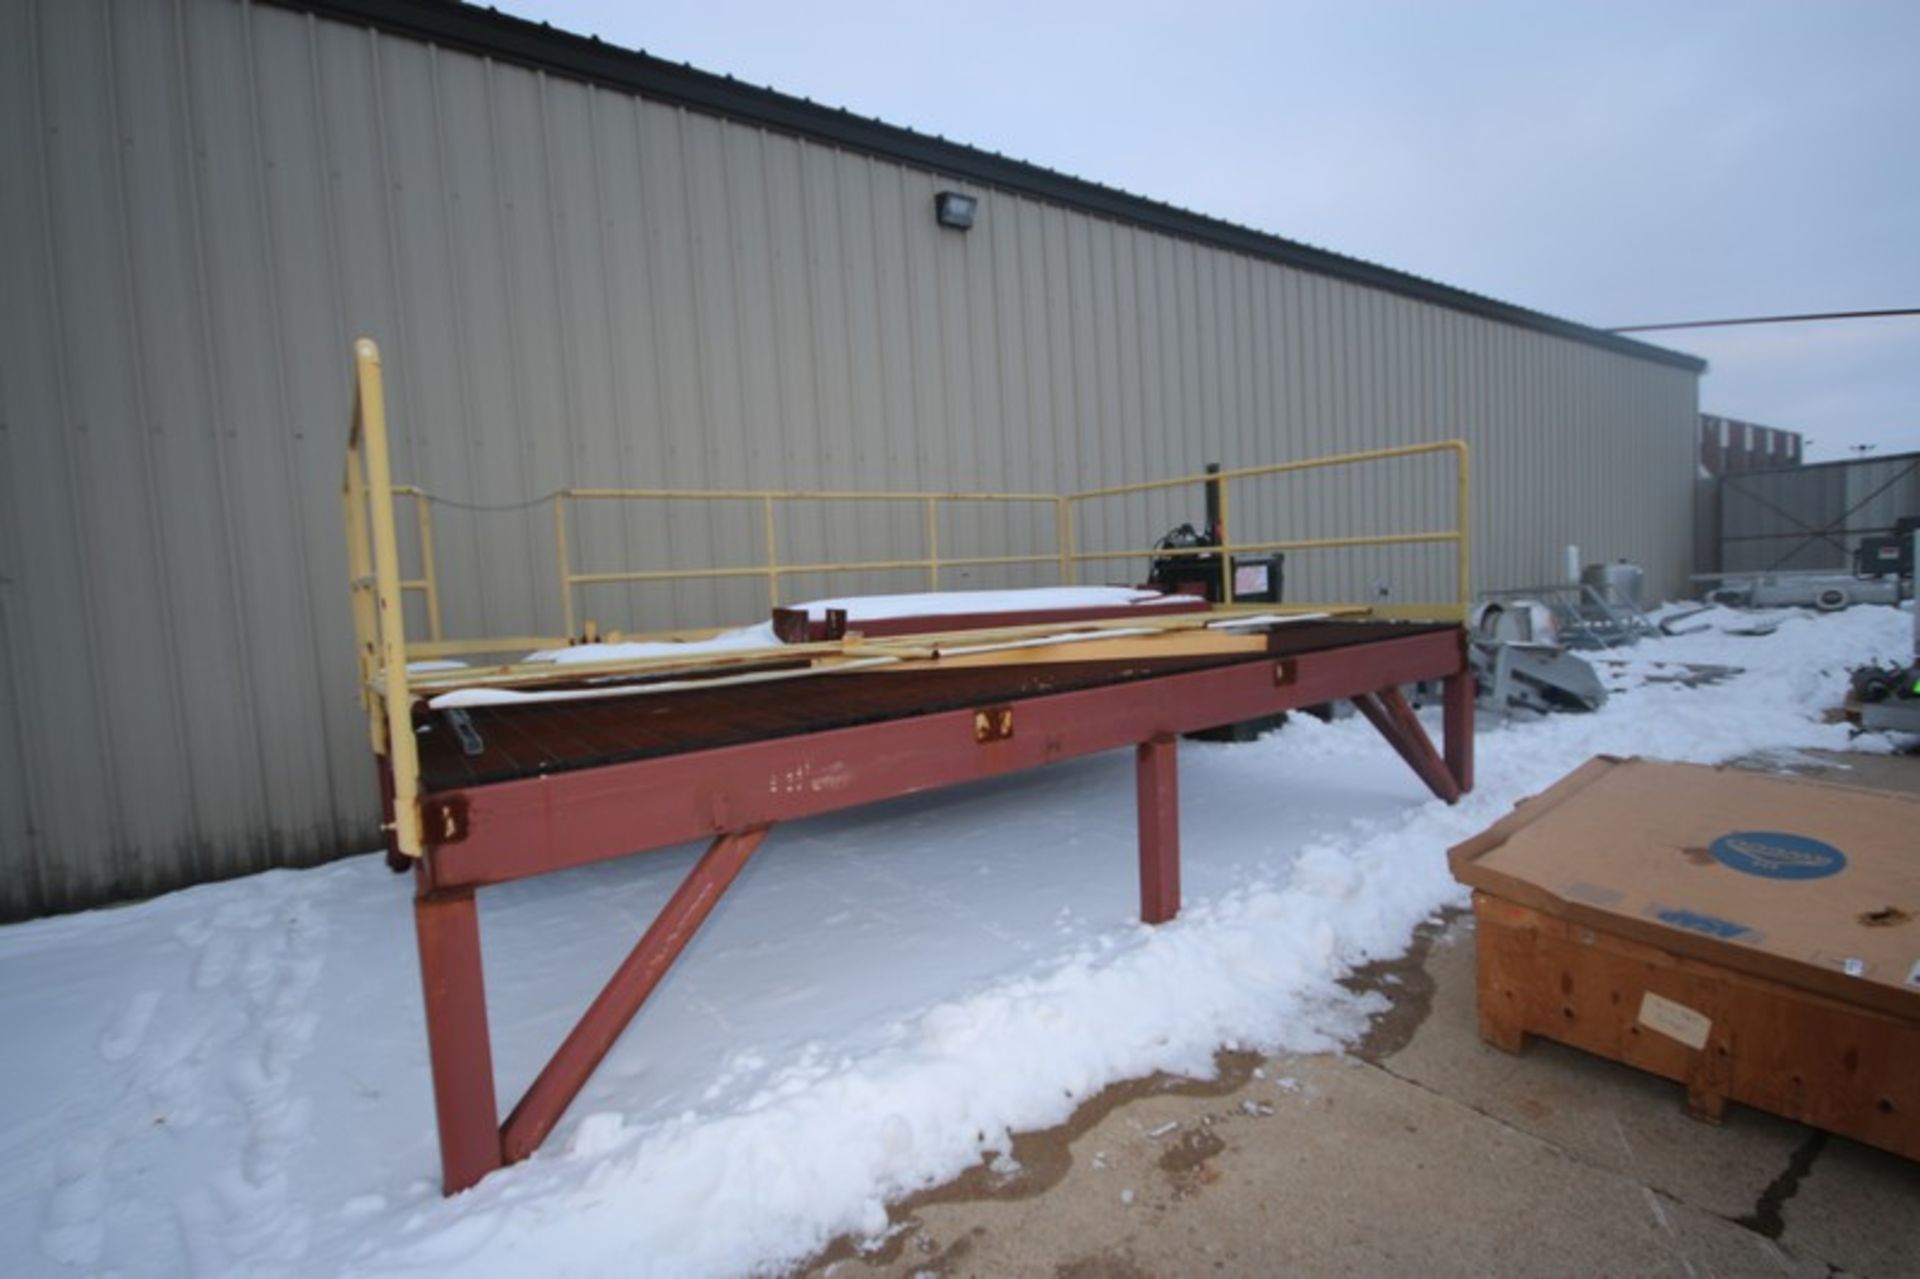 Steel Platform, with Steel Grating & Hand Rails, with Overall Dims.: Aprox. x 16' L x 11' W x 44"